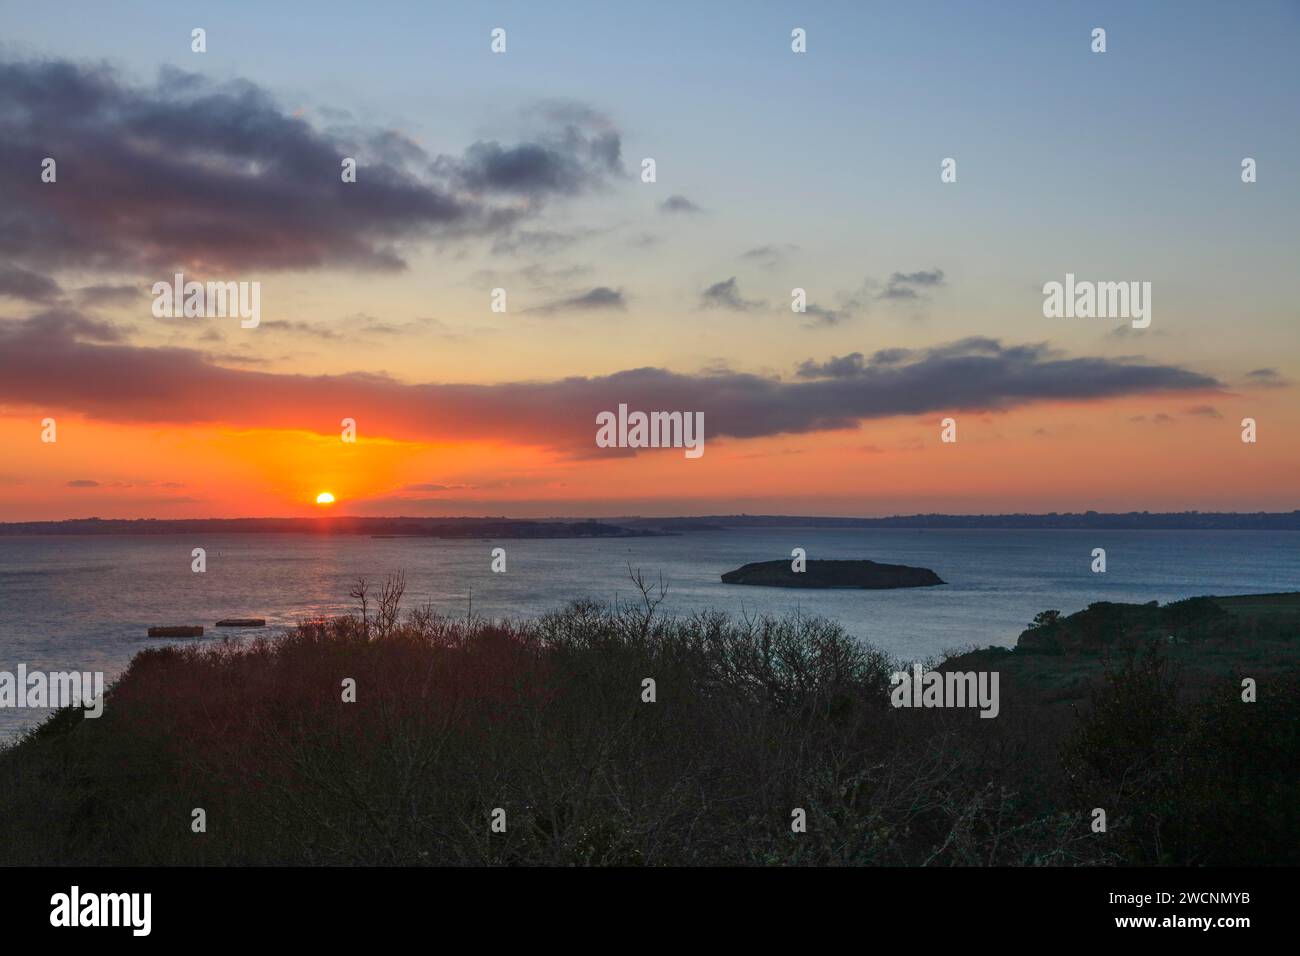 View at sunset from the Pointe de l'Armorique over the bay Rade de Brest with the small island Ile Ronde, behind the peninsula Presqu'ile de Crozon Stock Photo